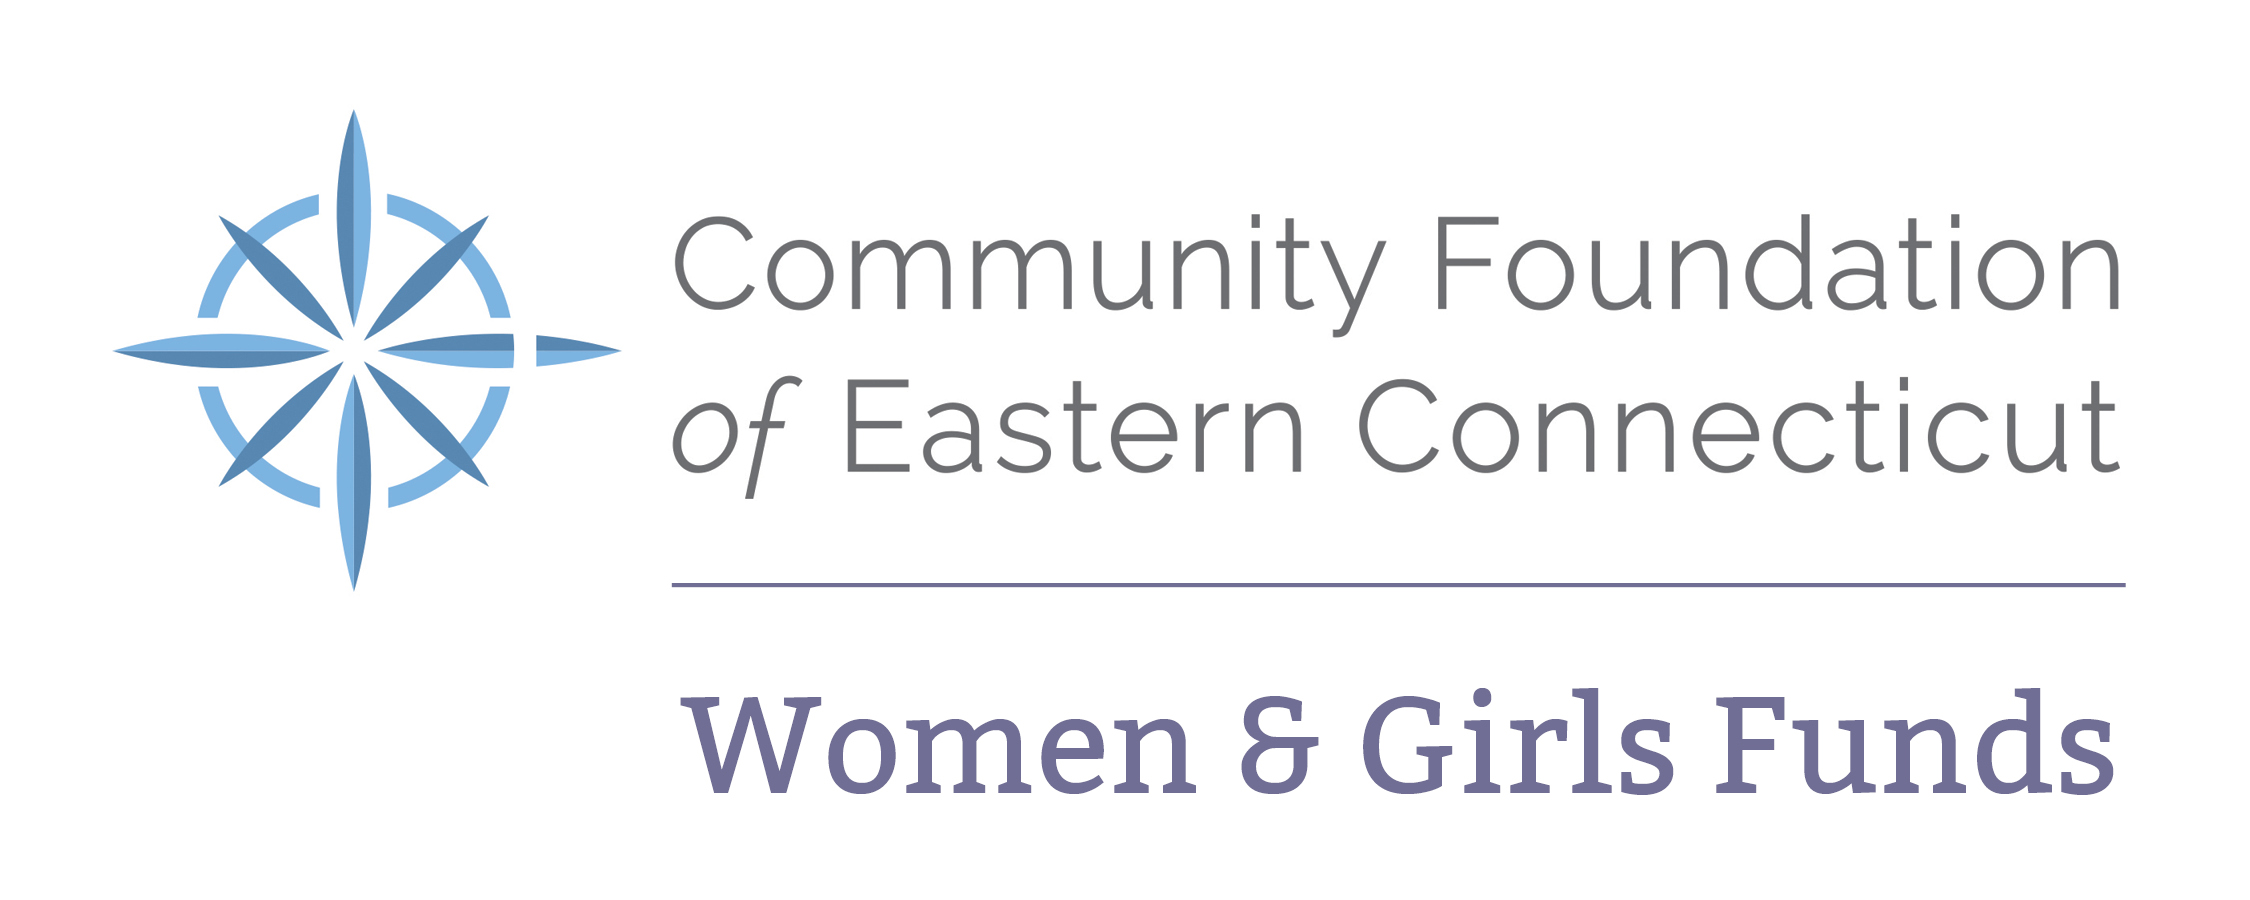 The Community Foundation of Eastern Connecticut